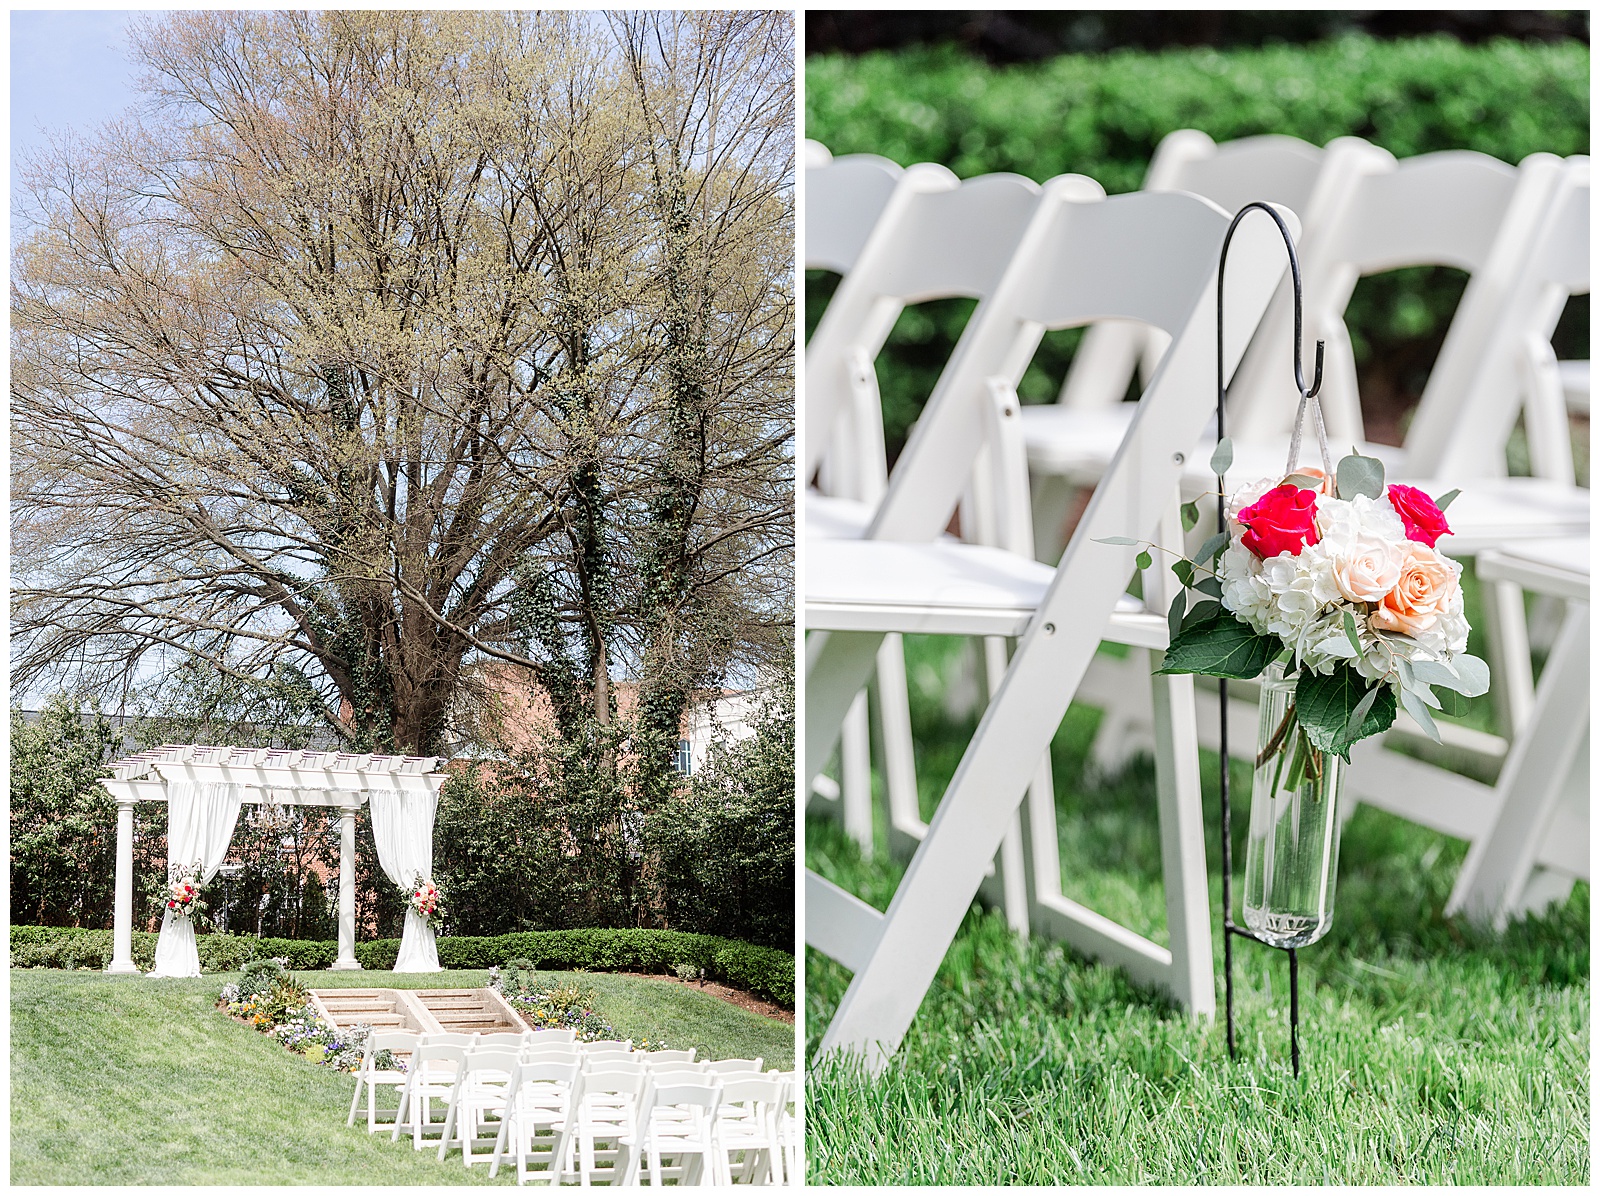 Ceremony Setup from Light and Airy Outdoor Wedding at Separk Mansion in Gastonia, NC | Kevyn Dixon Photography